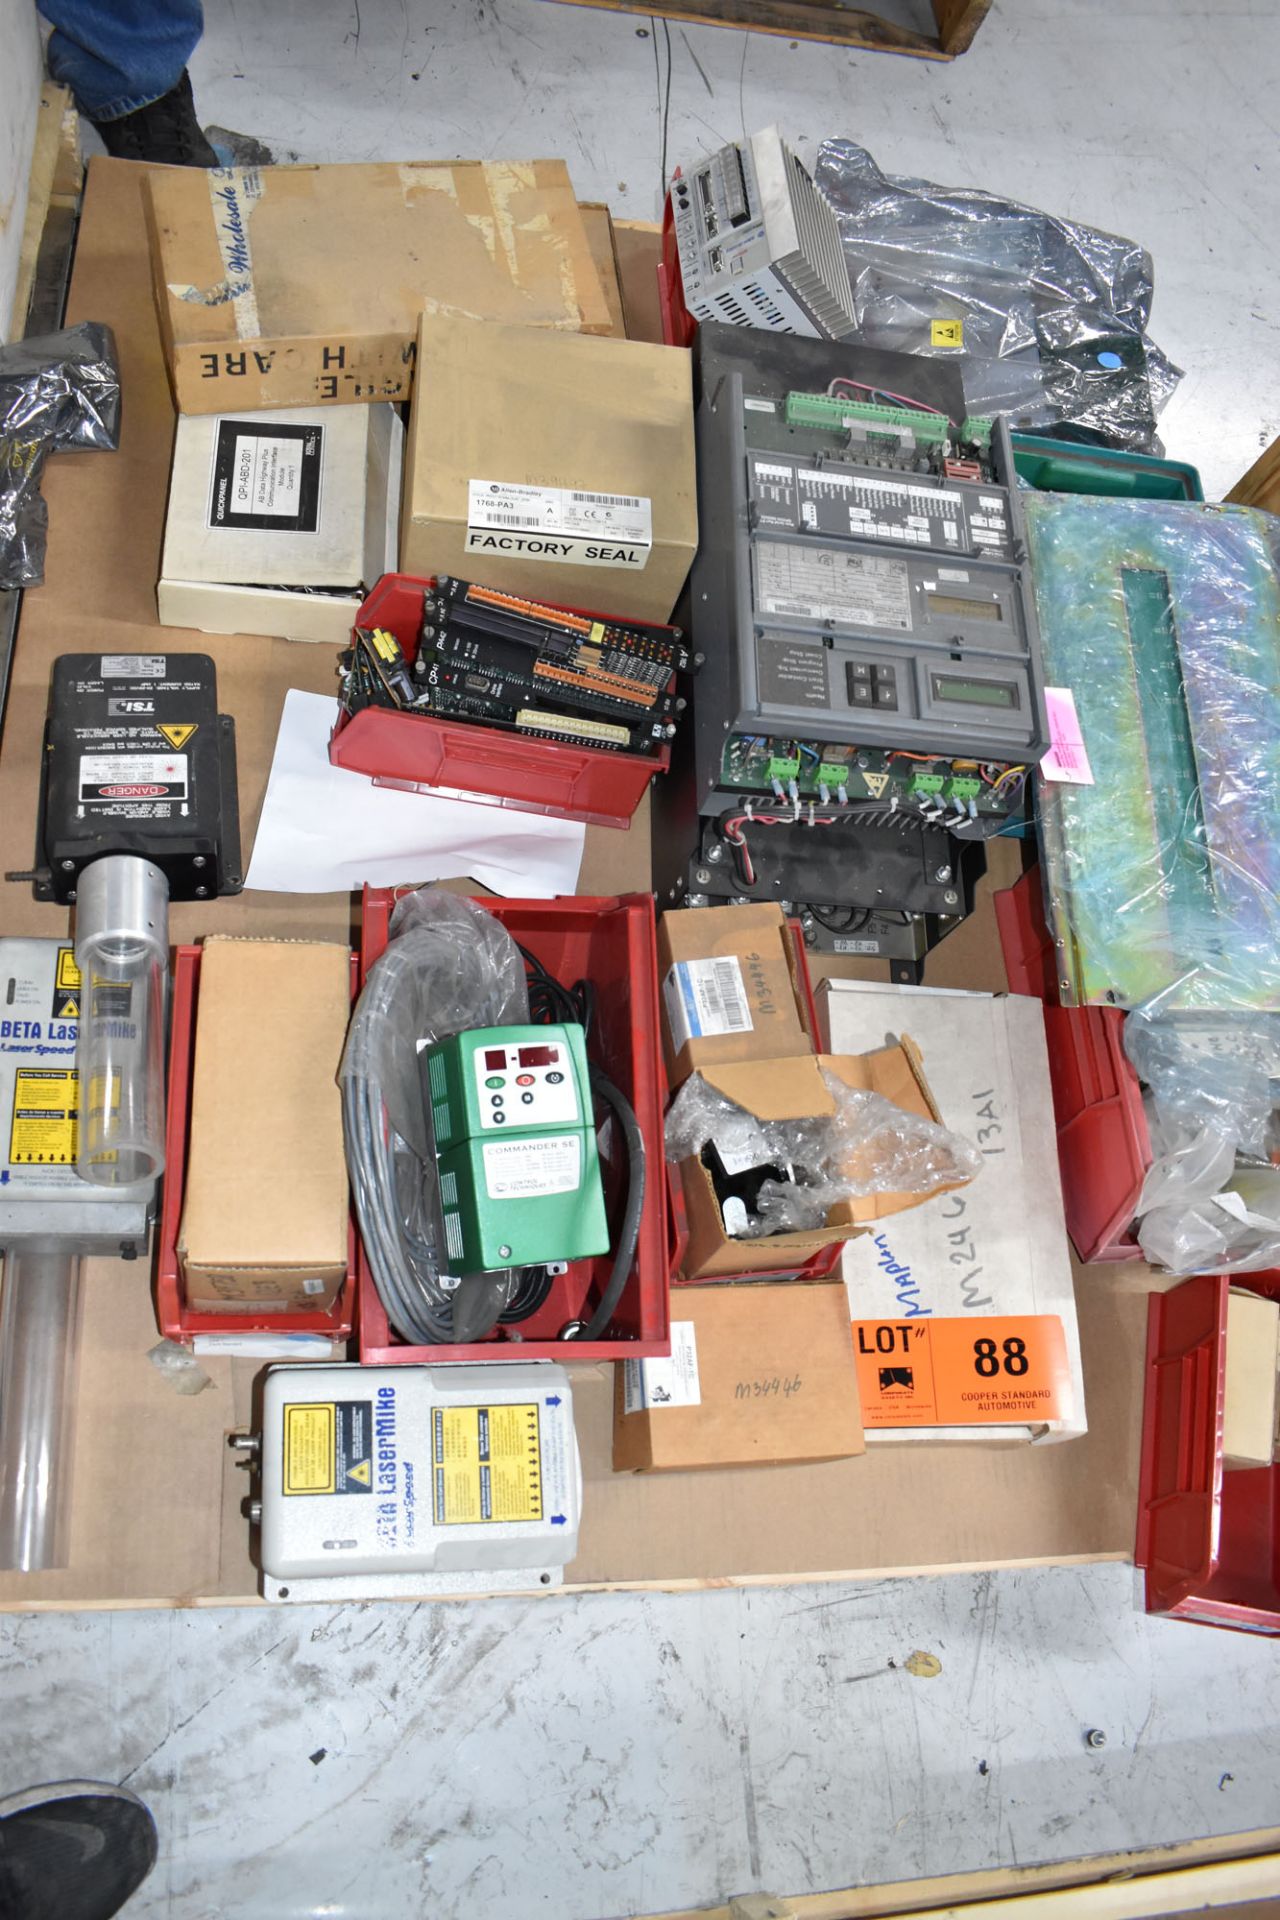 LOT/ PALLET WITH CONTENTS CONSISTING OF ELECTRICAL PANELS, PARTS, AND EXTRUDER LINE COMPONENTS [